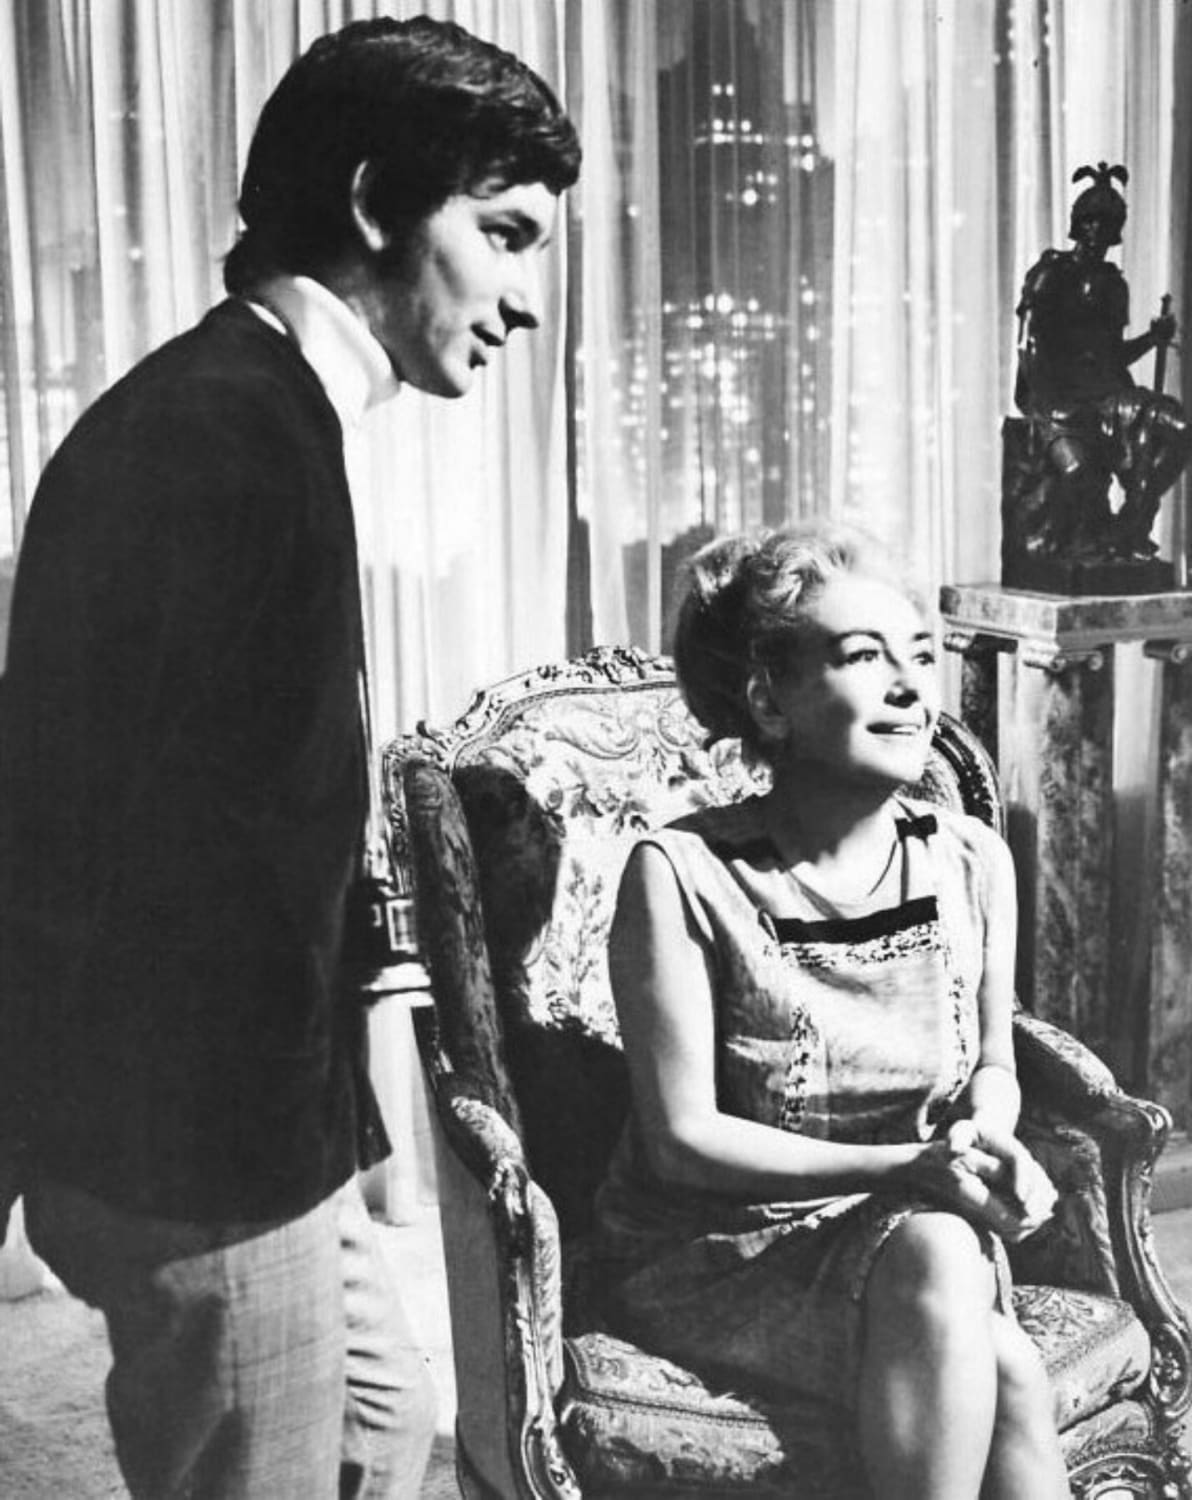 22 YO Steven Spielberg directing his first work in Hollywood, Roger Serling's TV Film and pilot The Night Gallery. Joan Crawford was the first actress he had to direct. November 1969.